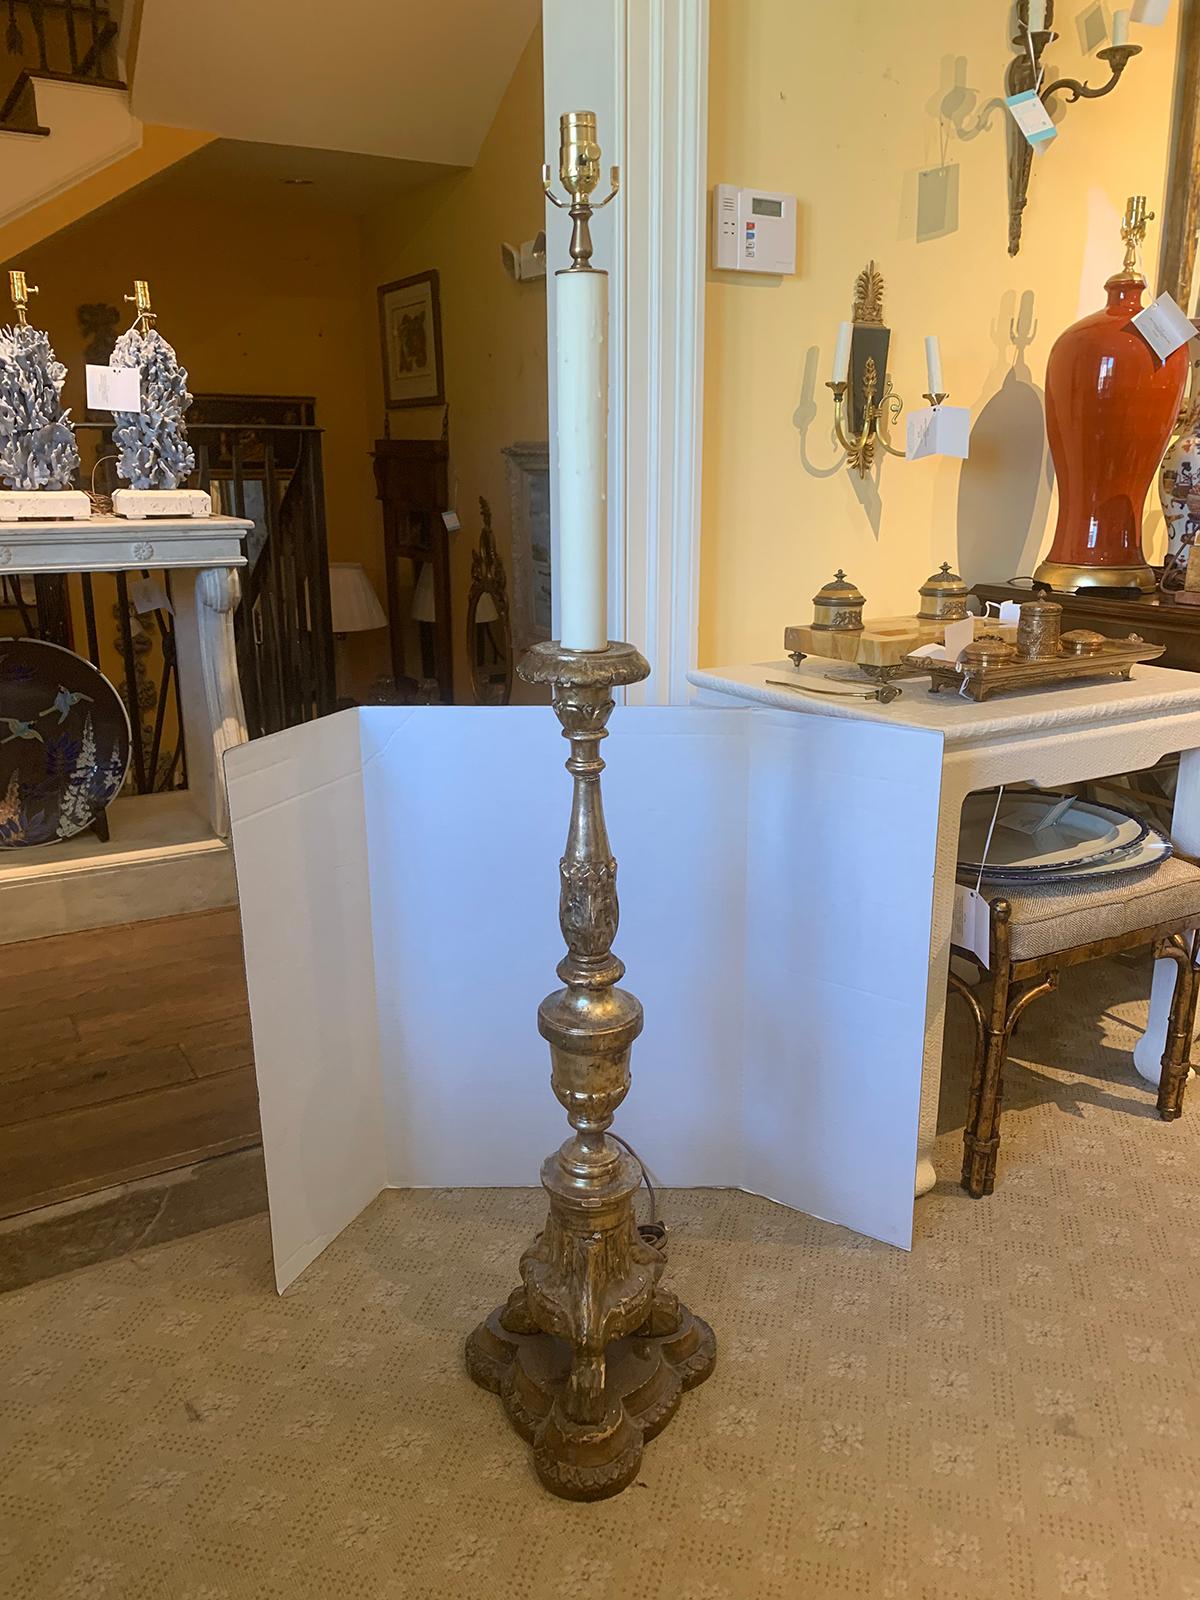 19th century giltwood torchiere or pricket as floor lamp
New wiring.